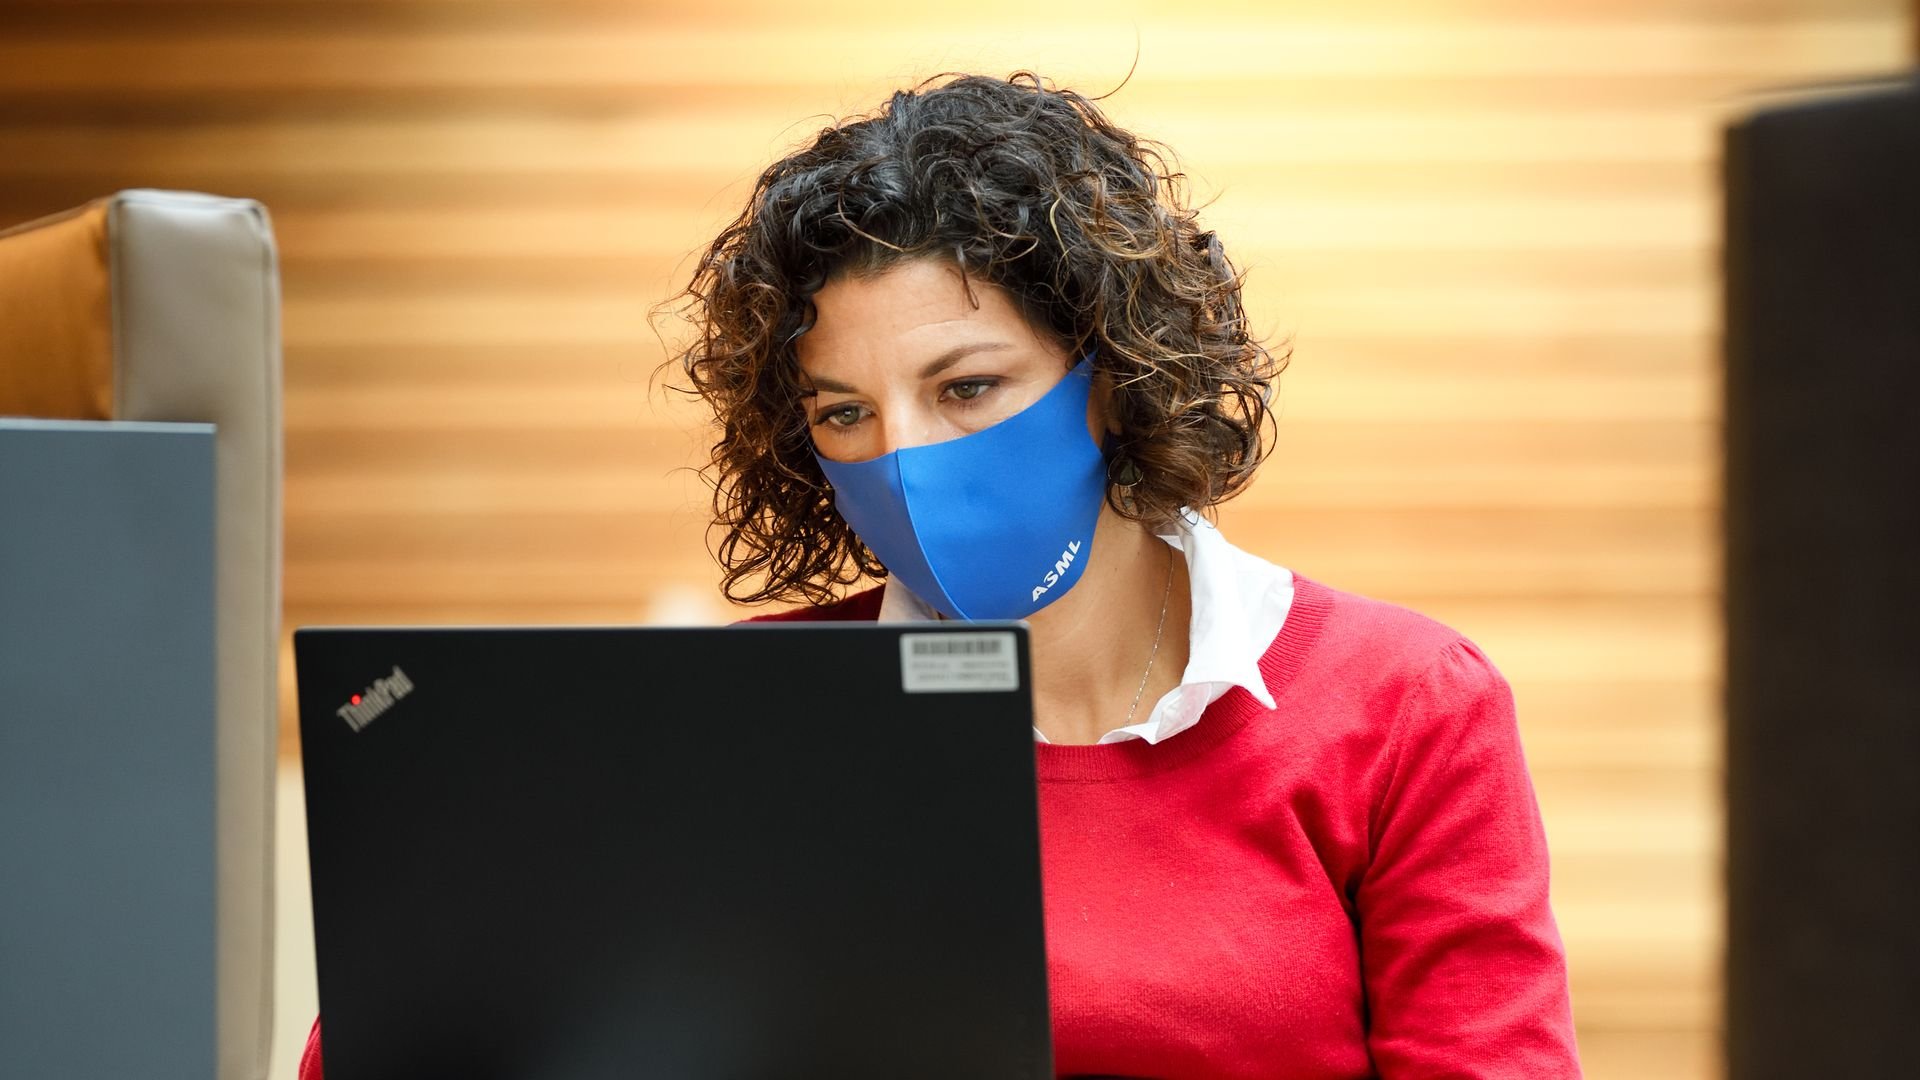 A woman in an ASML facemask works on her laptop